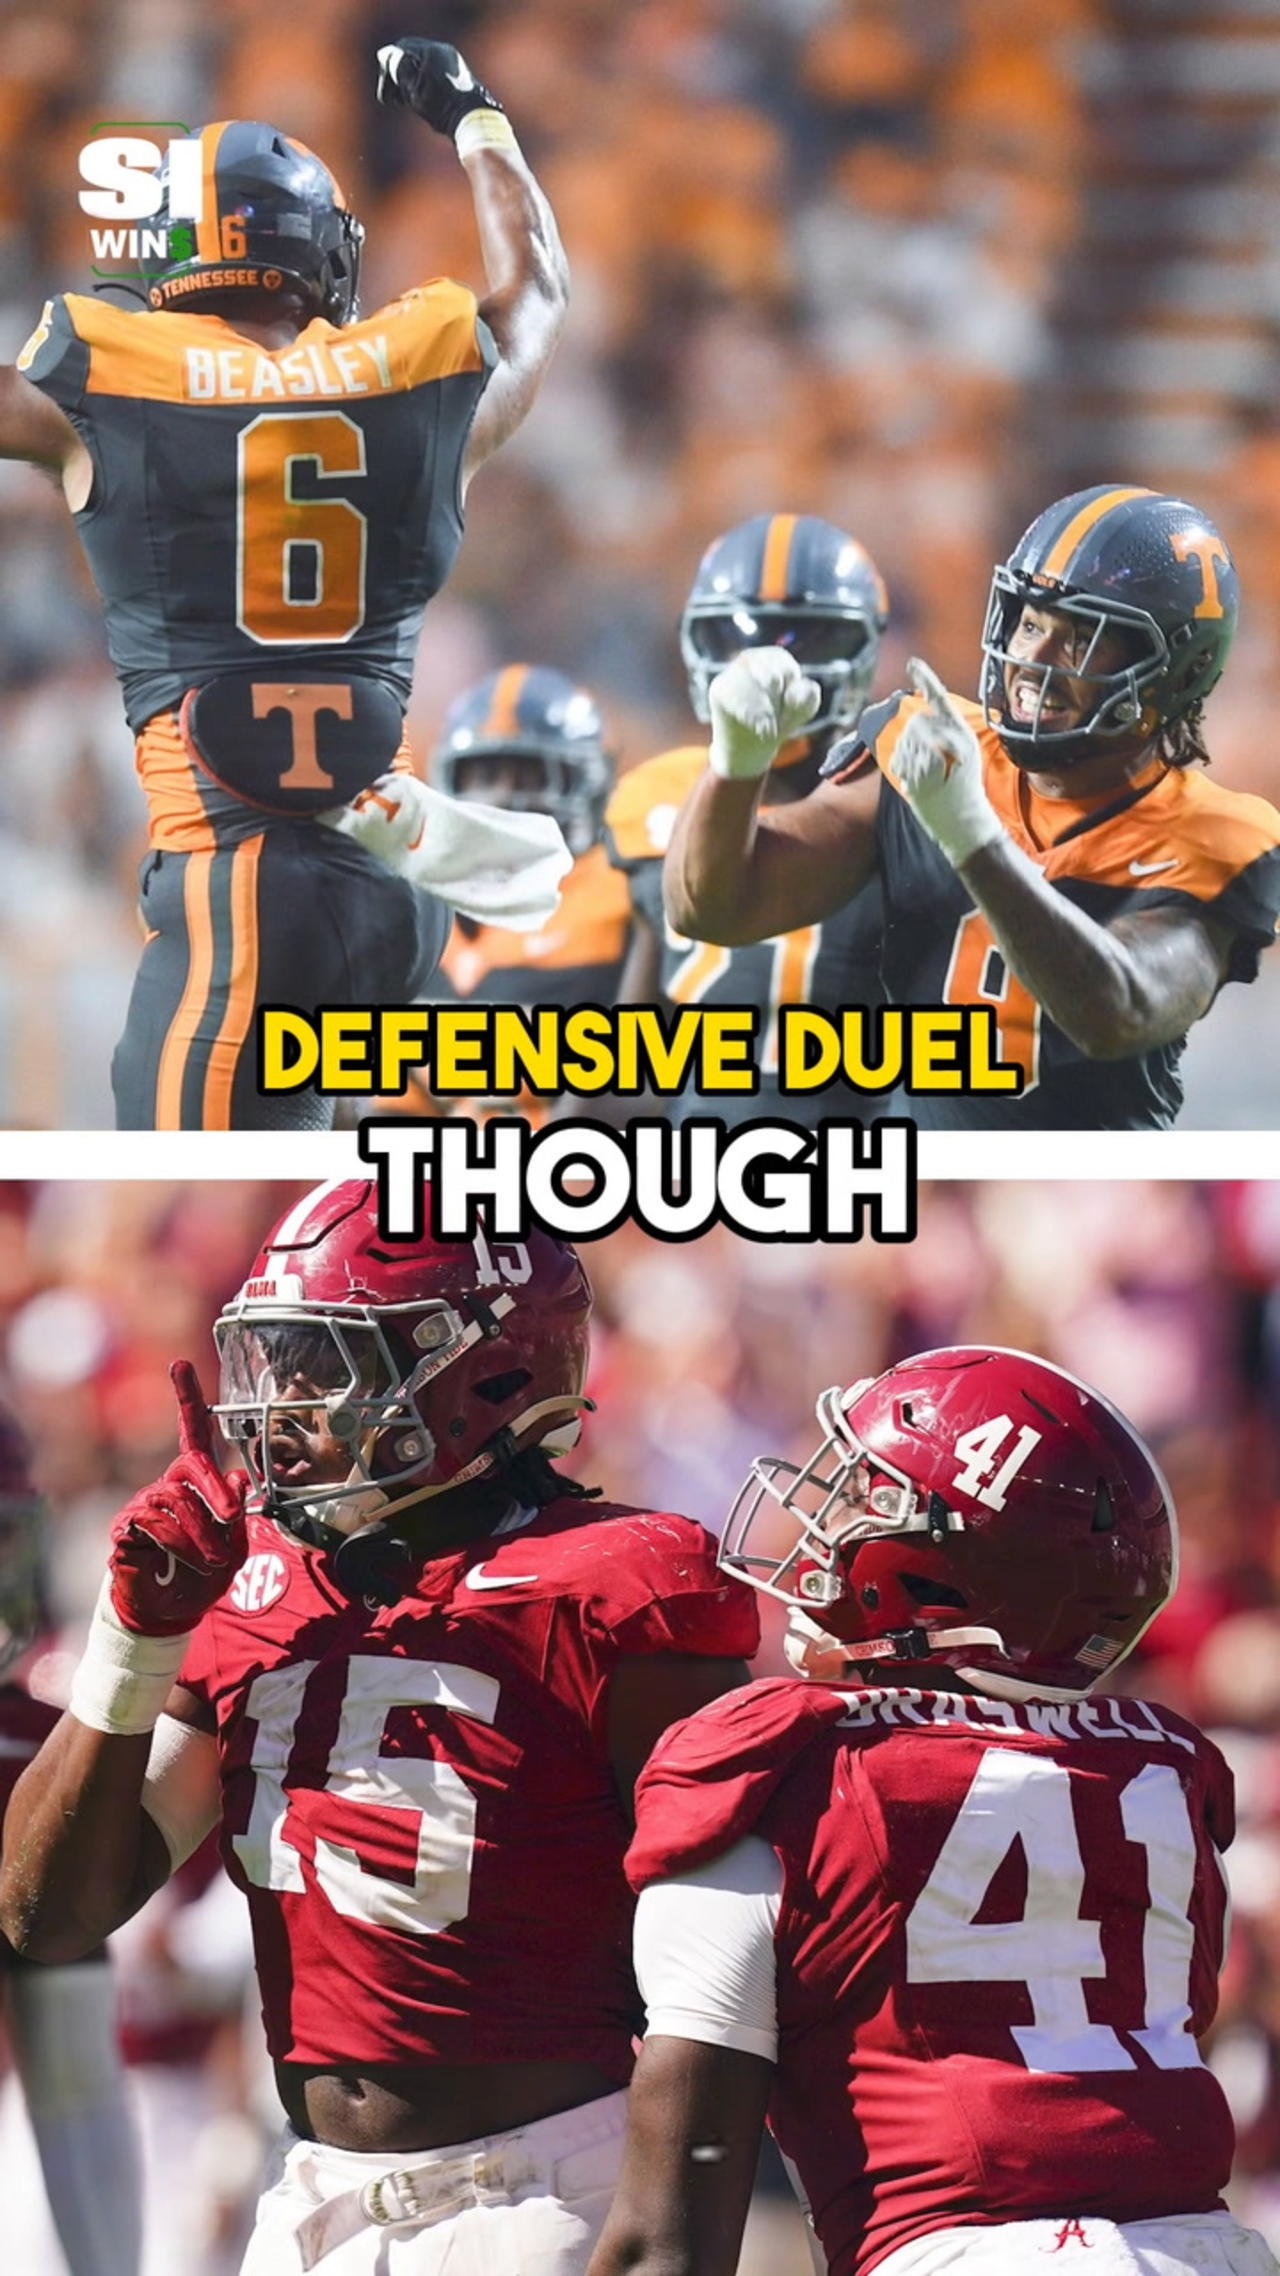 Alabama Will Attempt to Avenge Last Year's Loss Against Tennessee